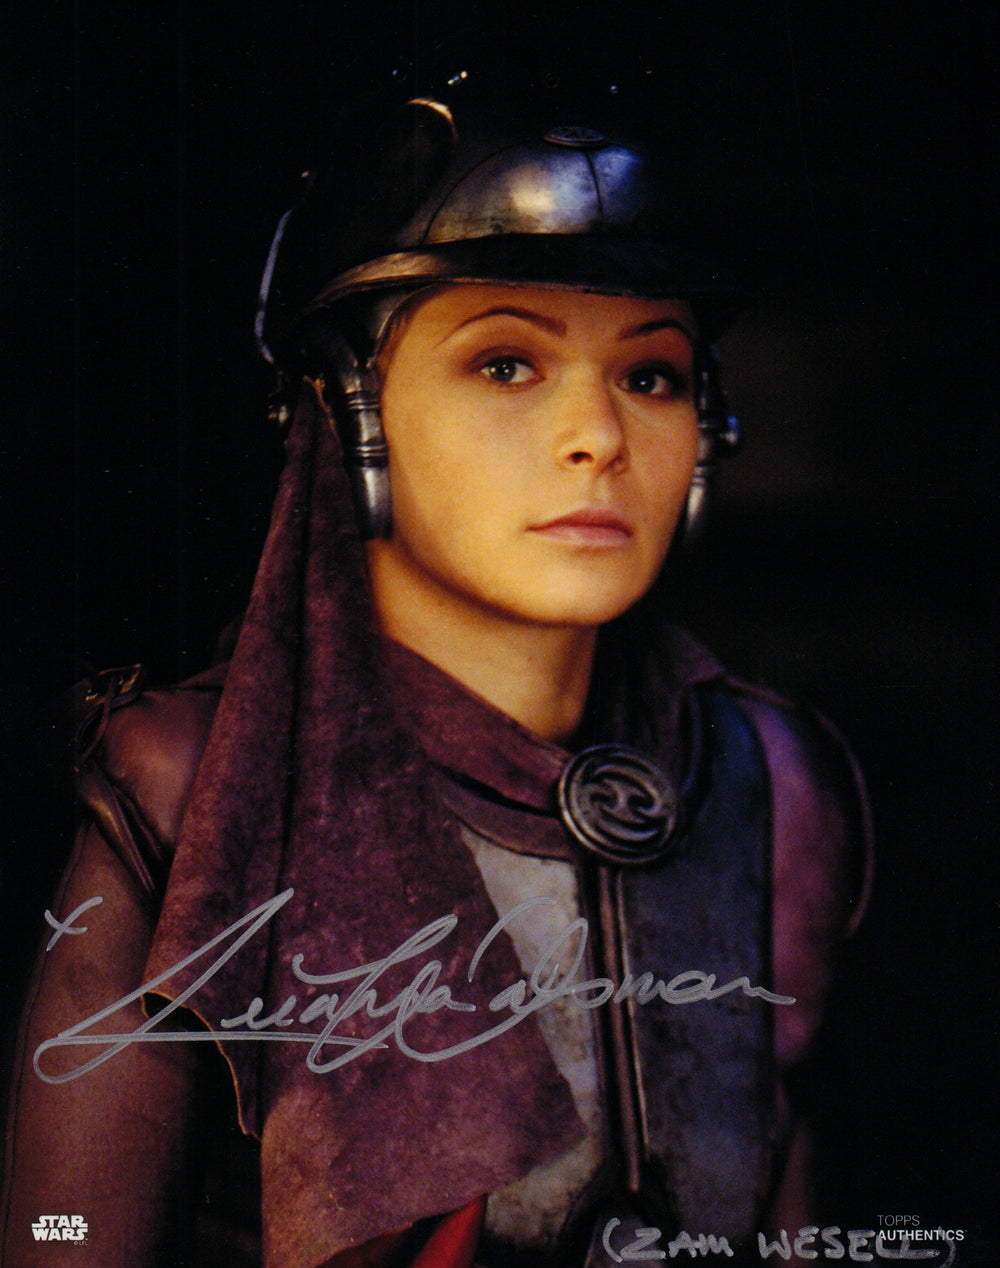 Leeanna Walsman as Zam Wesell from Star Wars Episode II: Attack of the Clones Signed 8x10 Photo with Character Name